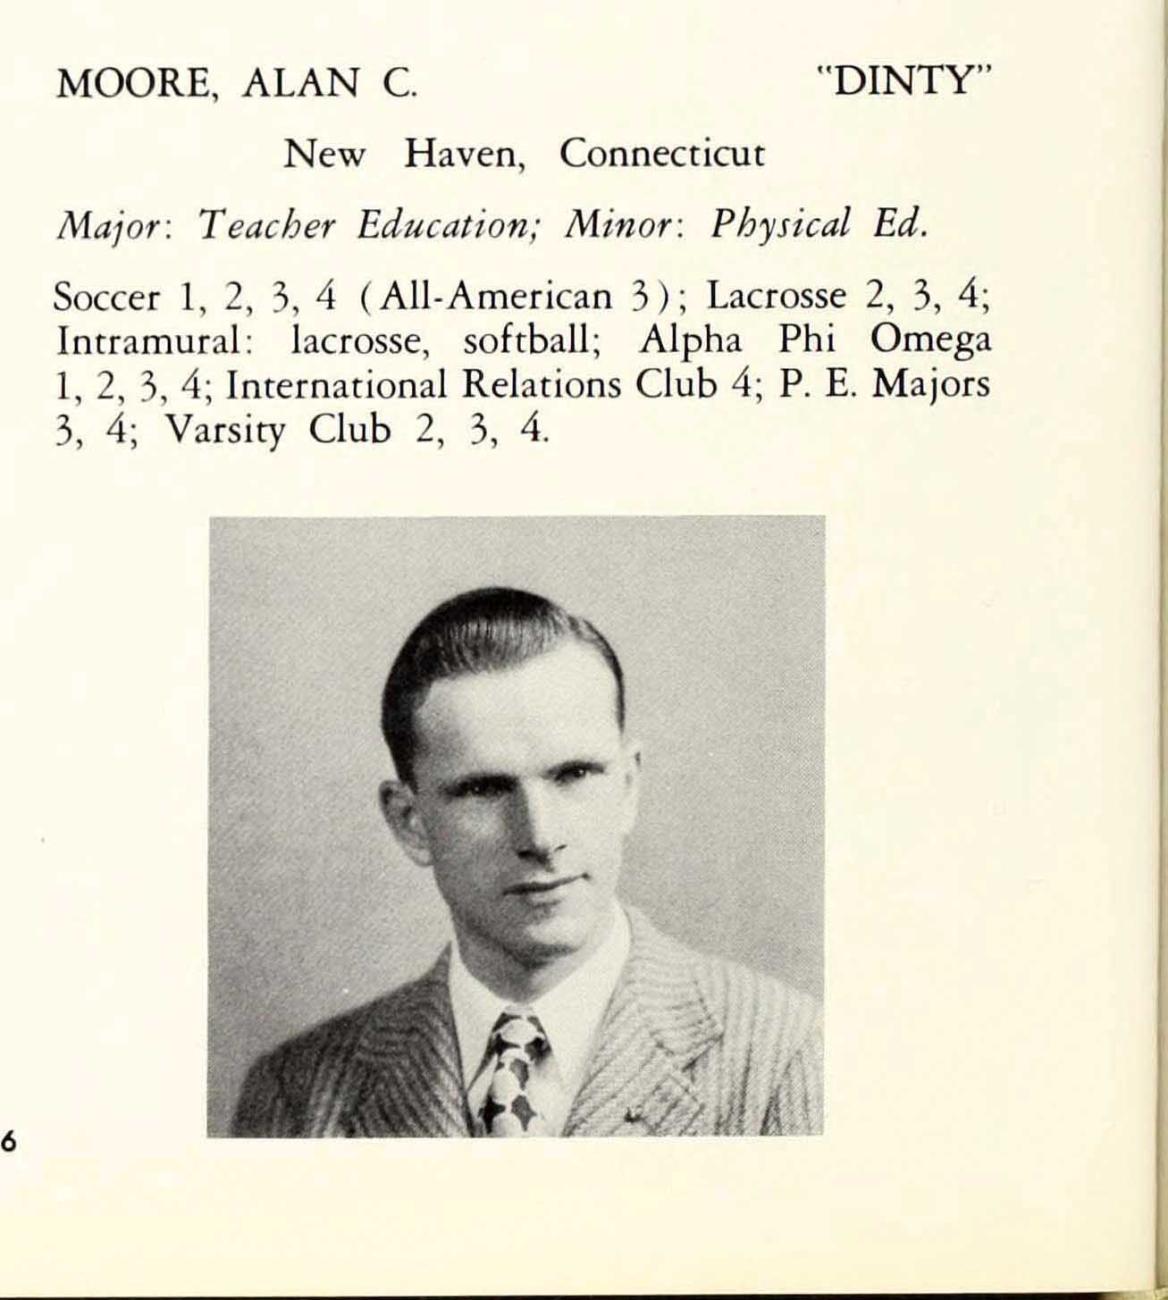 Alan "Dinty" Moore